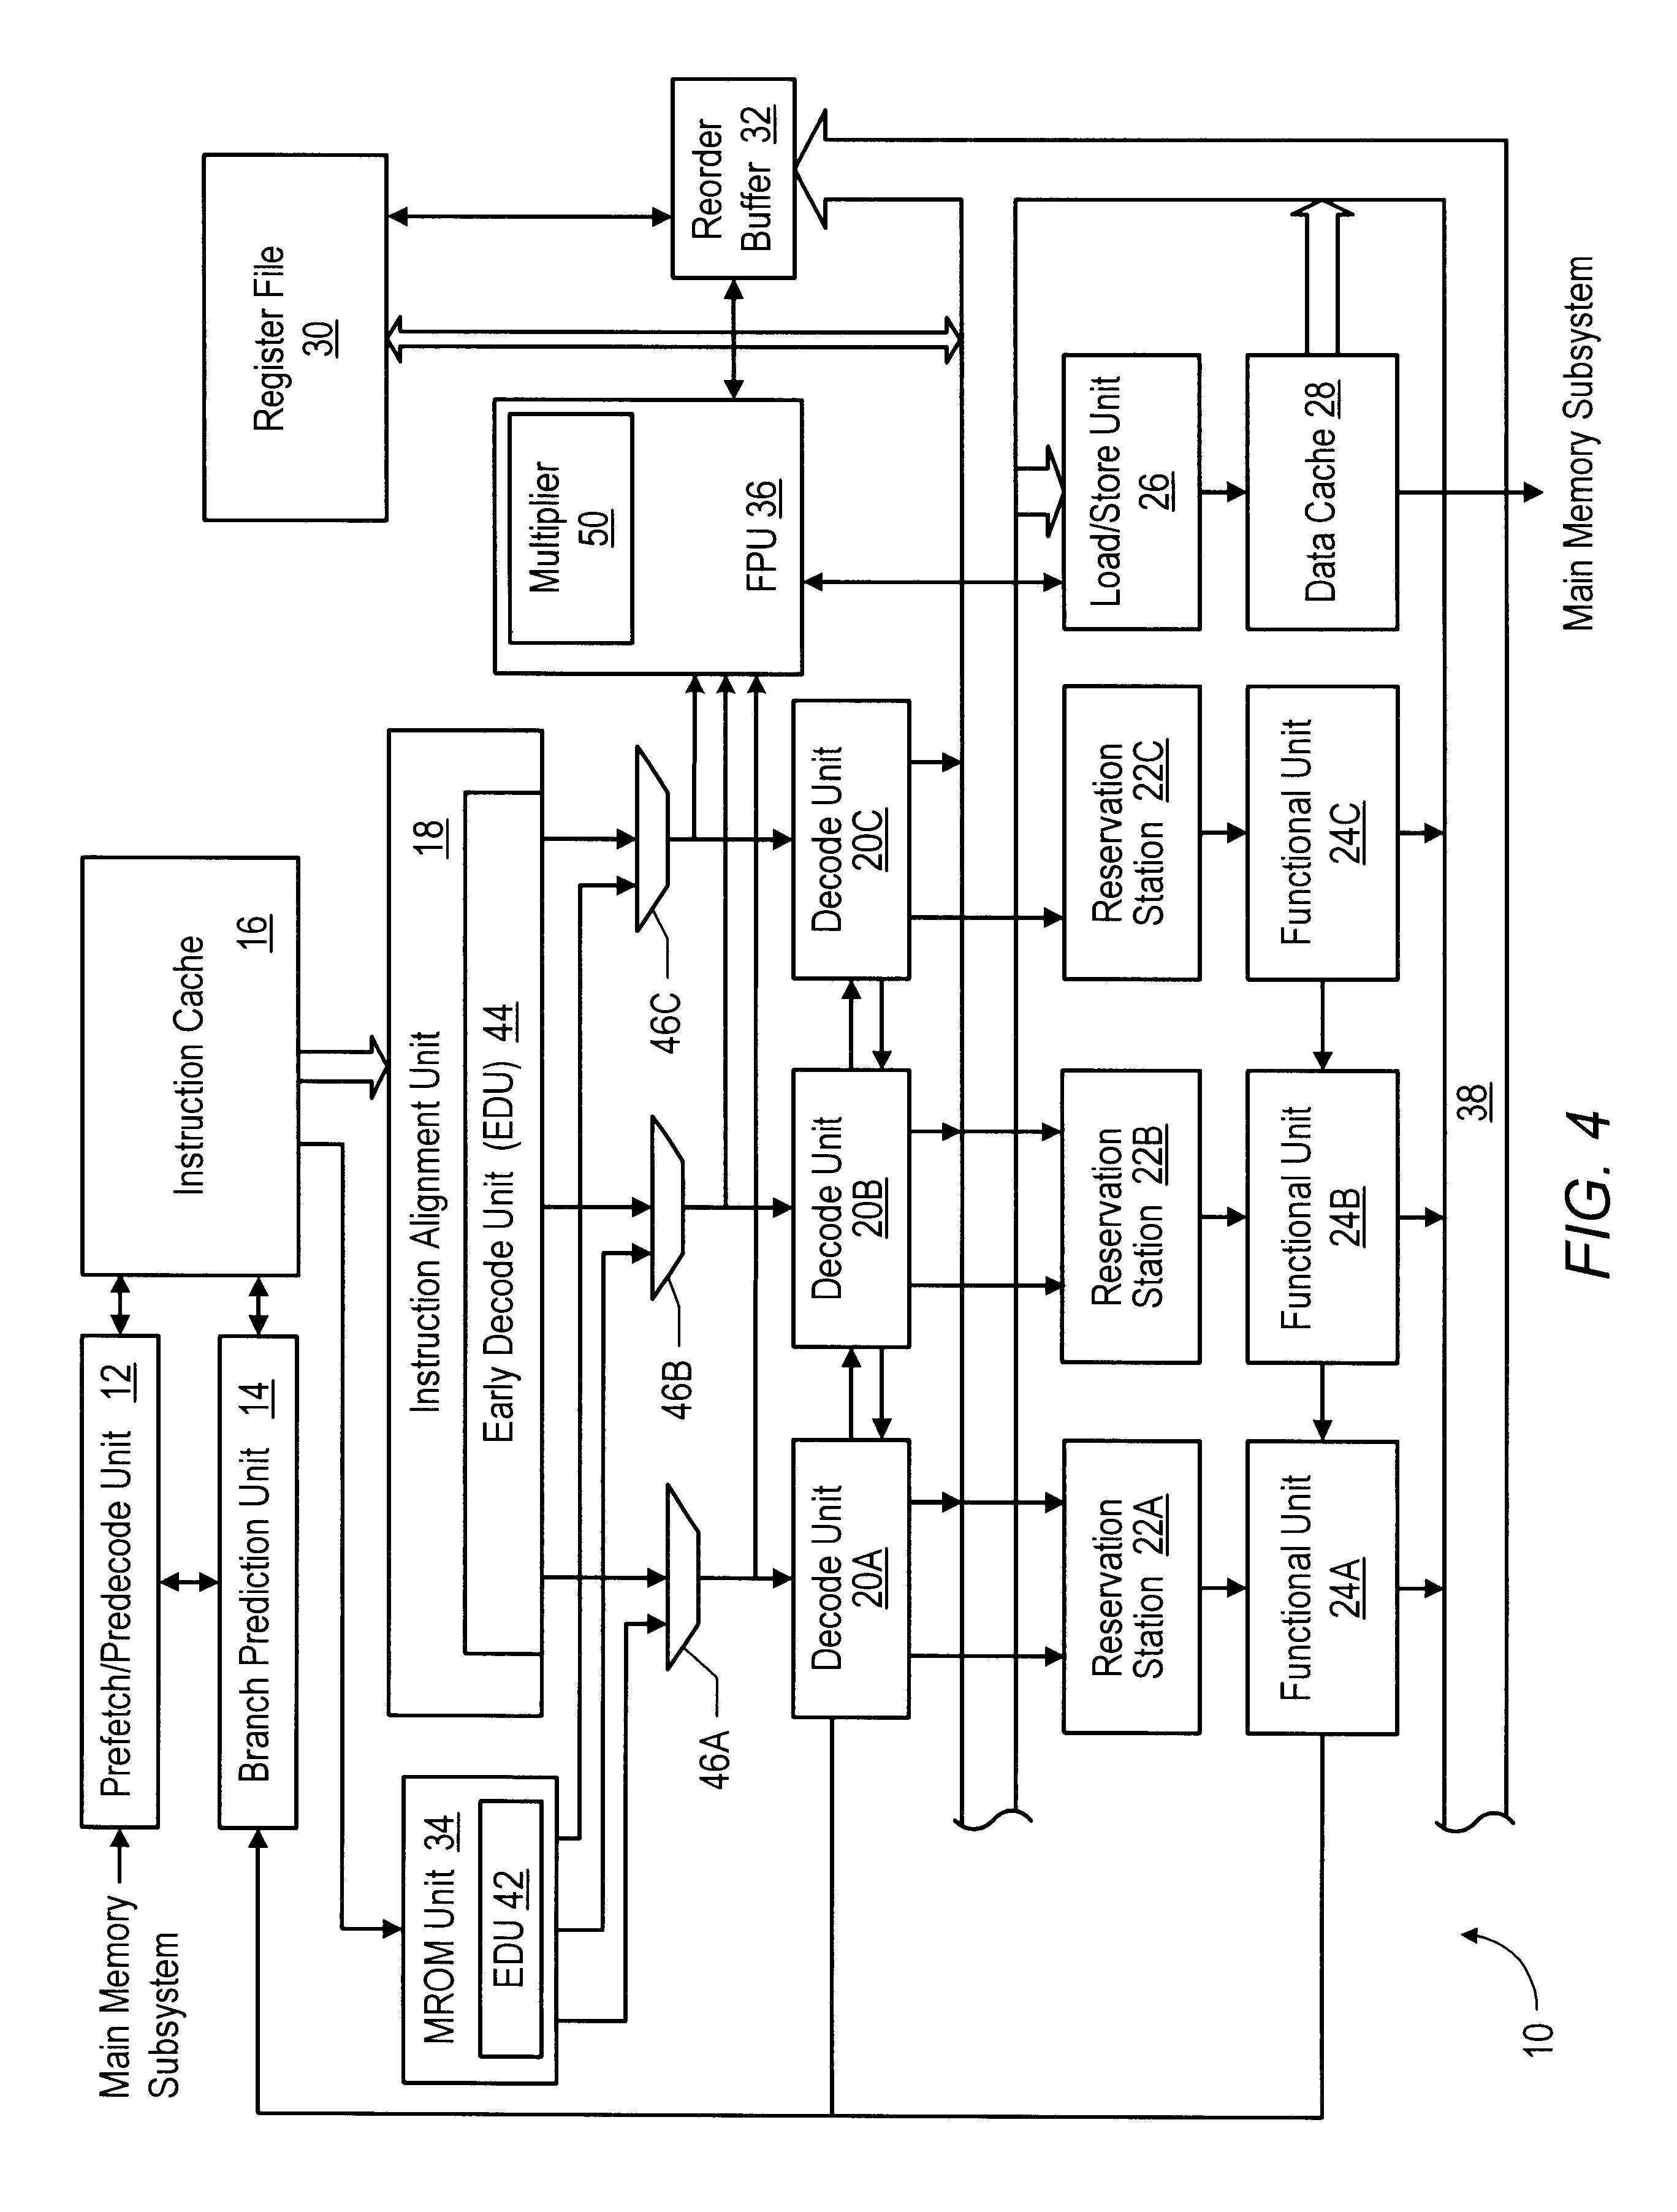 Rapid execution of floating point load control word instructions